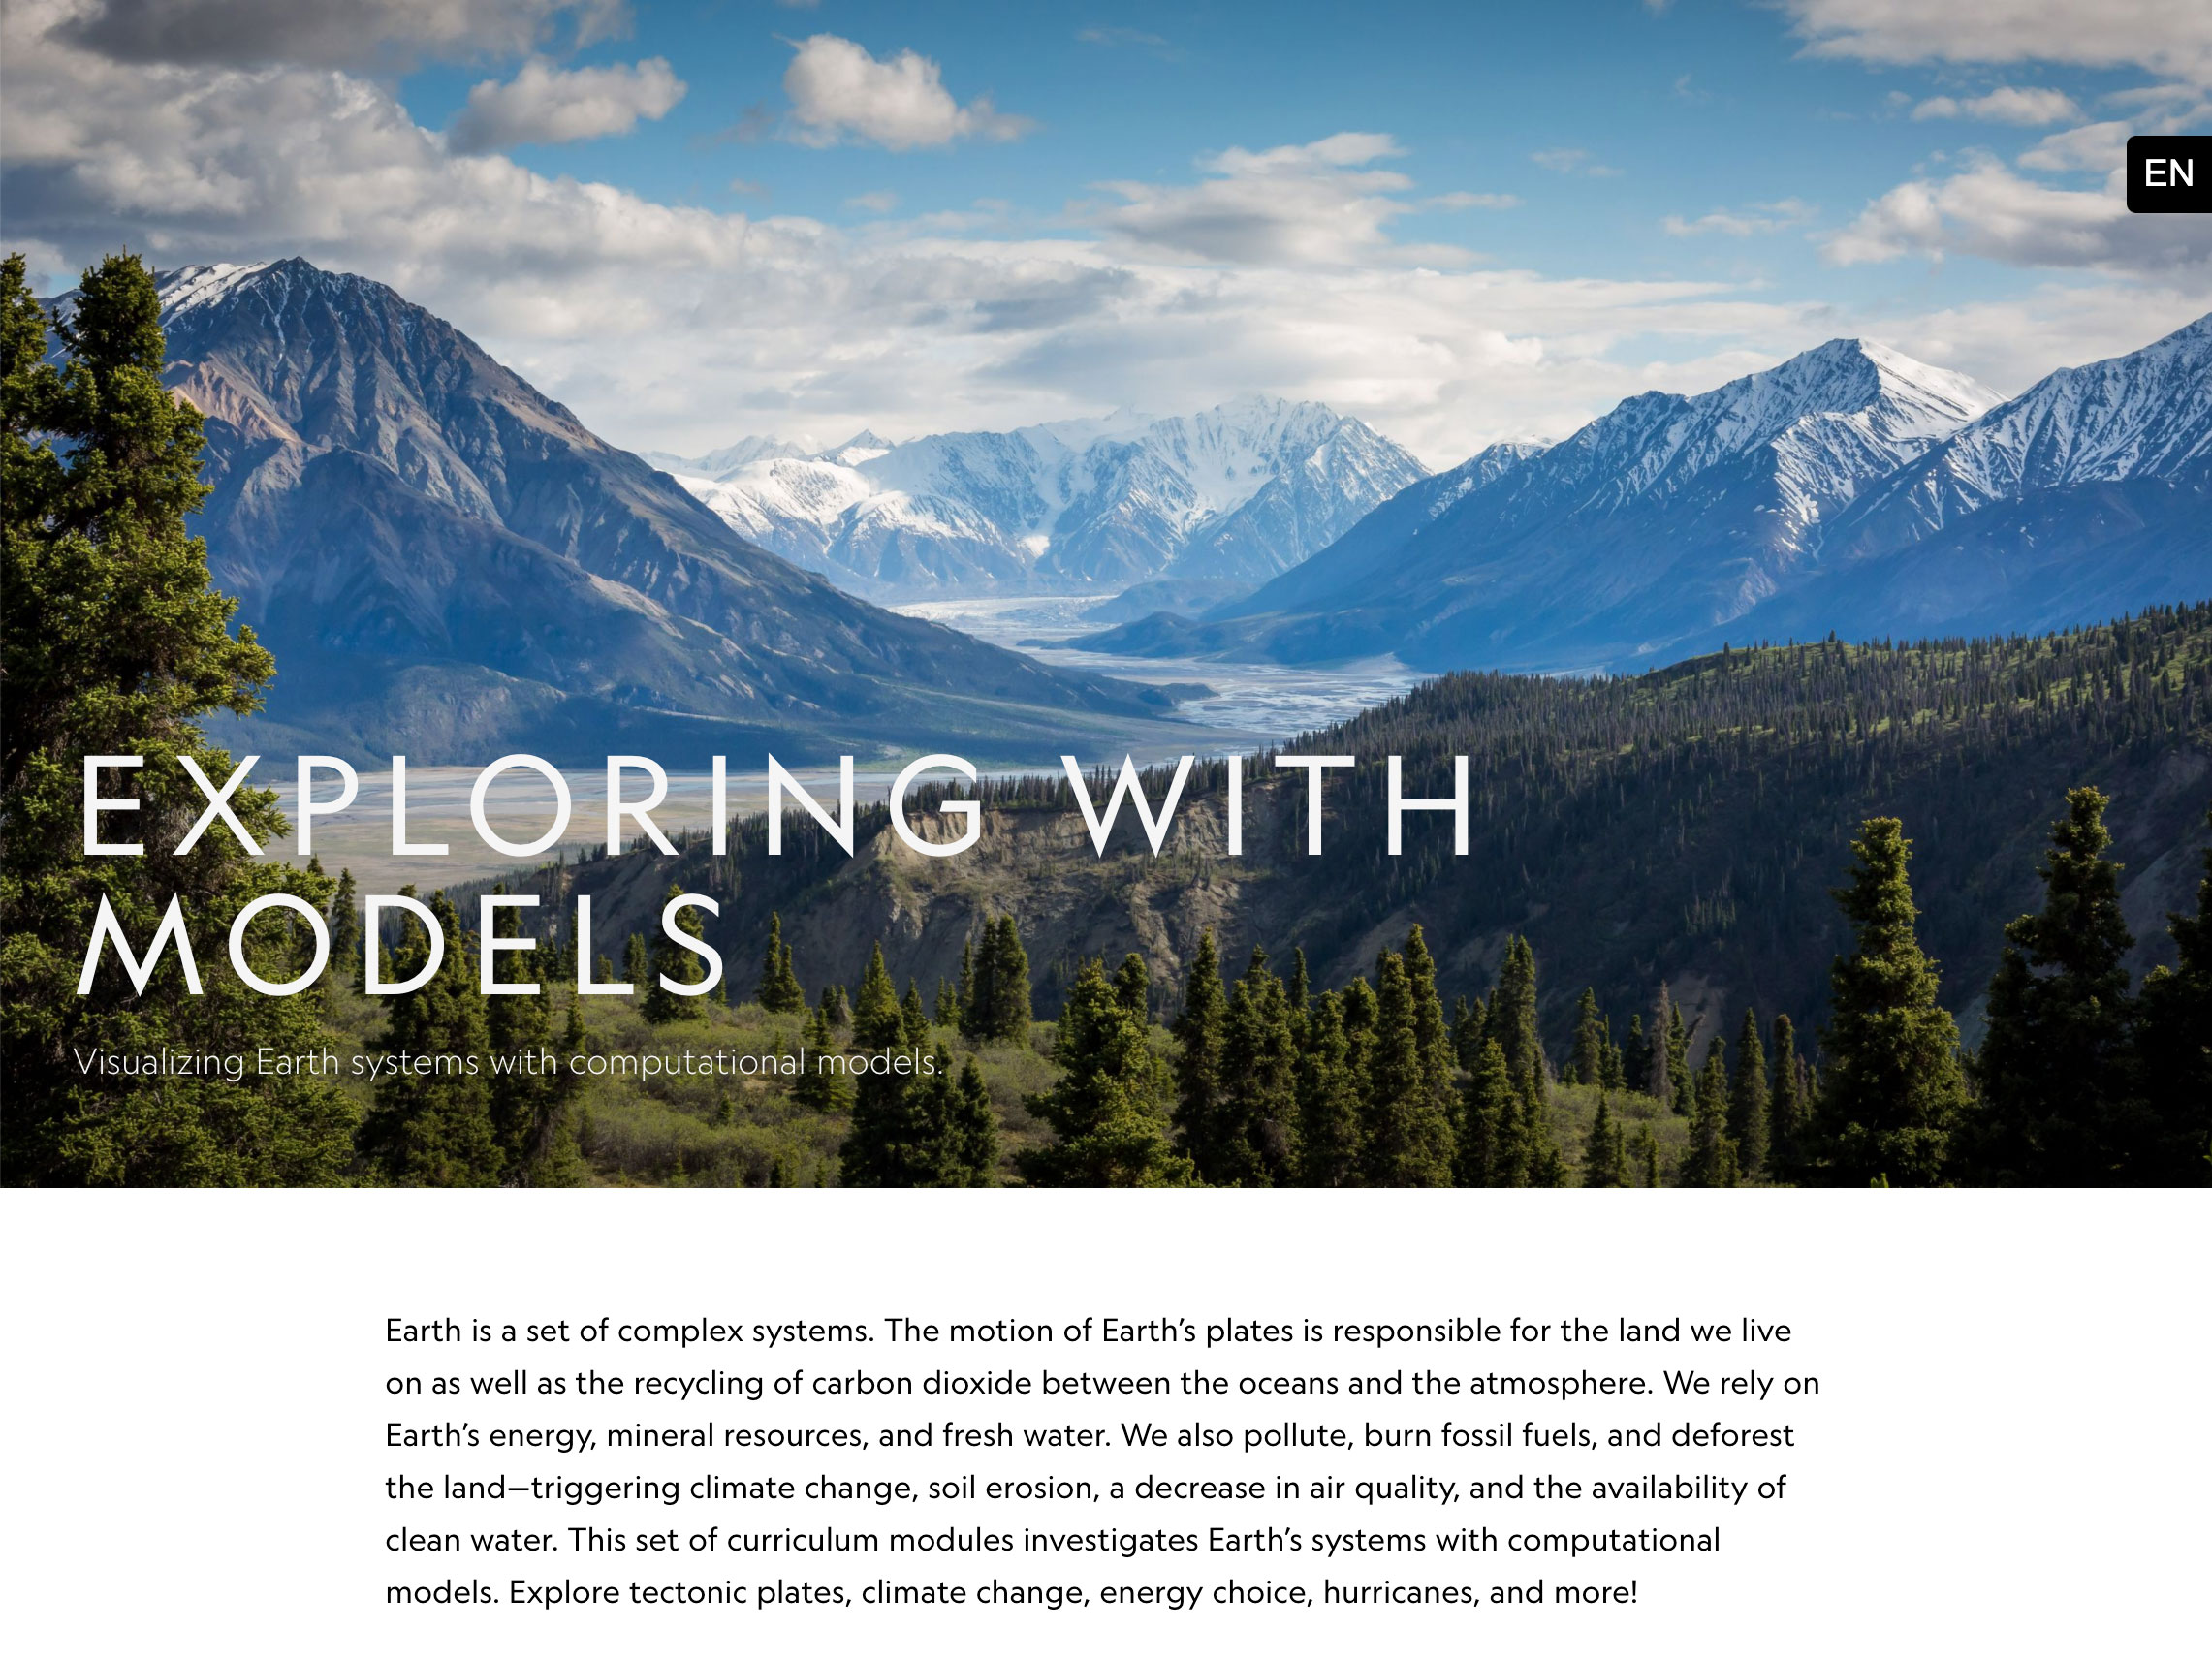 Exploring with Models page on National Geographic